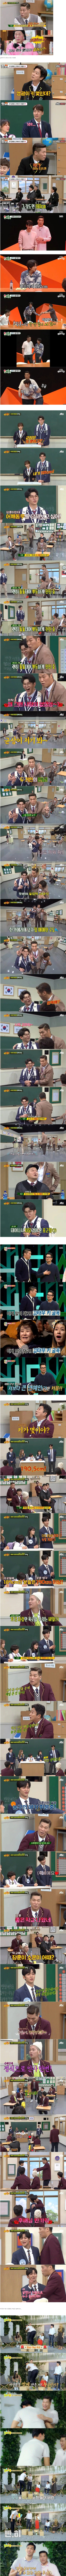 The tall celebrities who are surprised by Seo Jang Hoon's